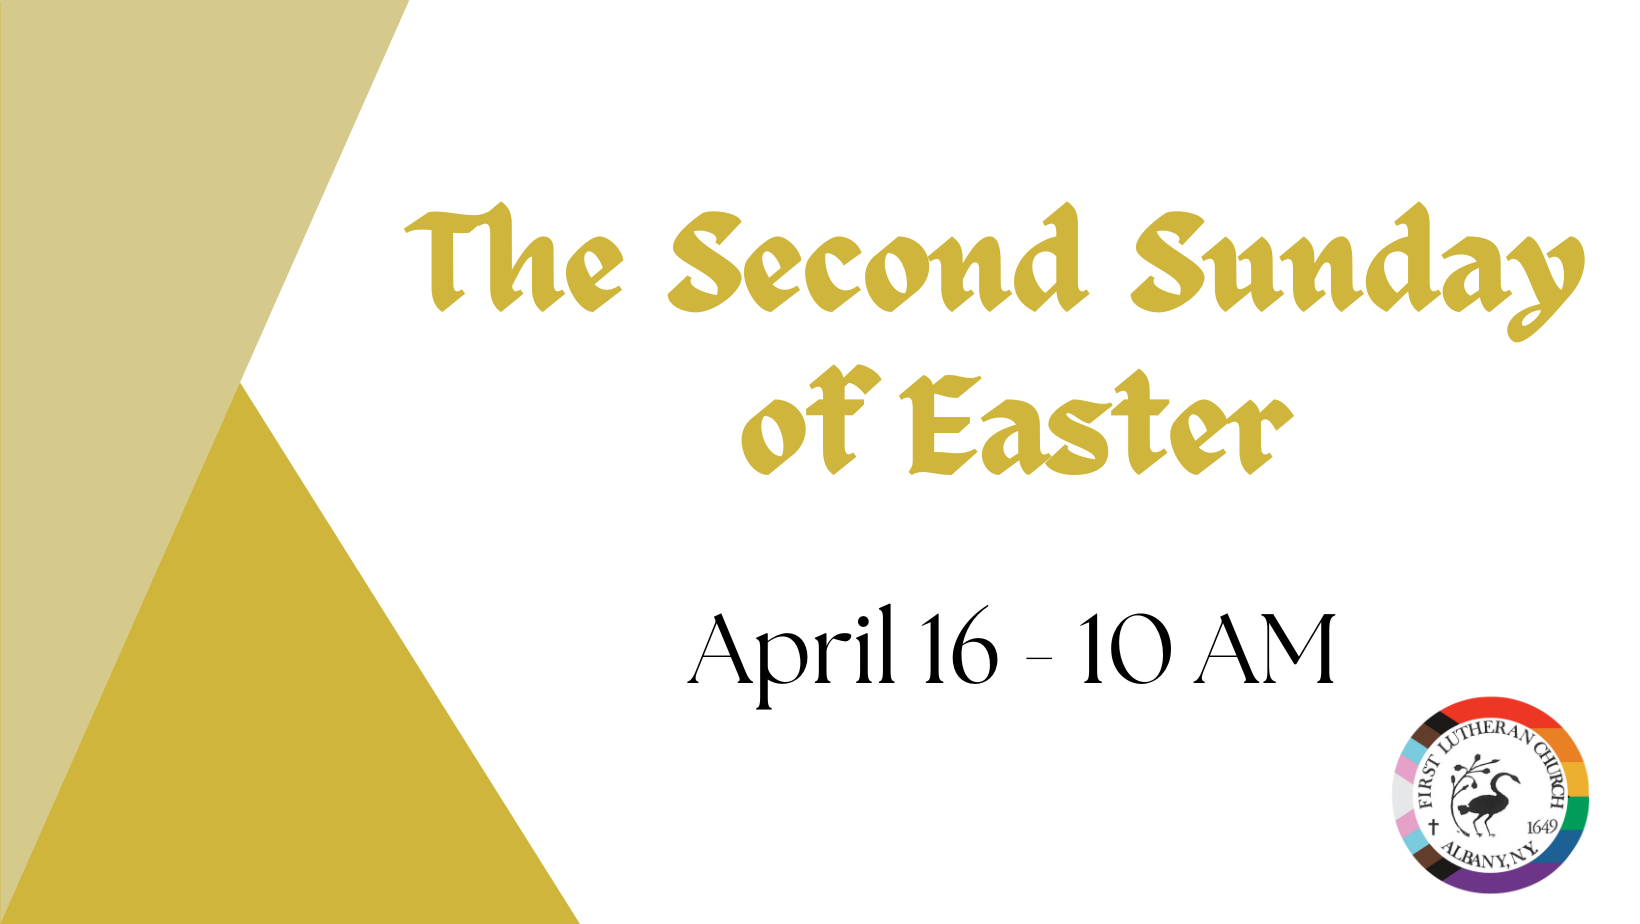 April 16 – The Second Sunday of Easter Worship at 10 AM with special guest, Bishop Lee Miller II.